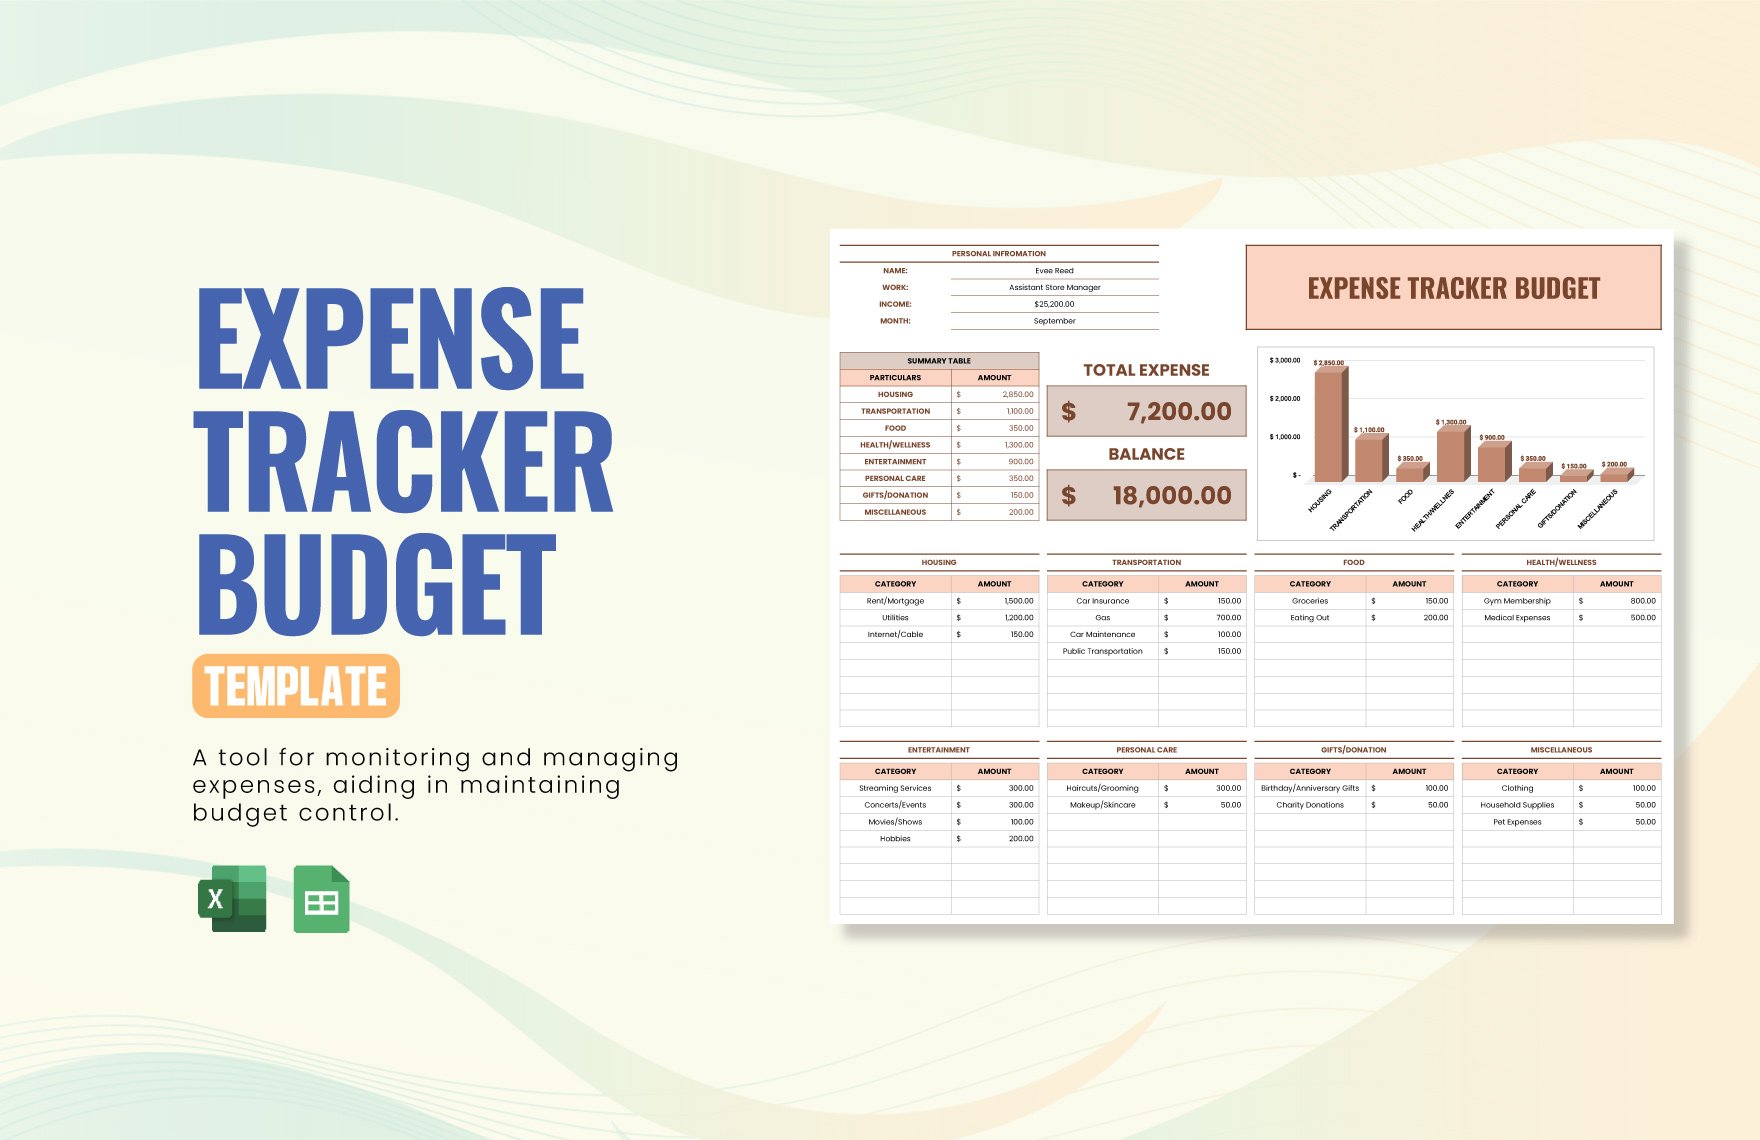 Free Expense Tracker Budget Template in Excel, Google Sheets